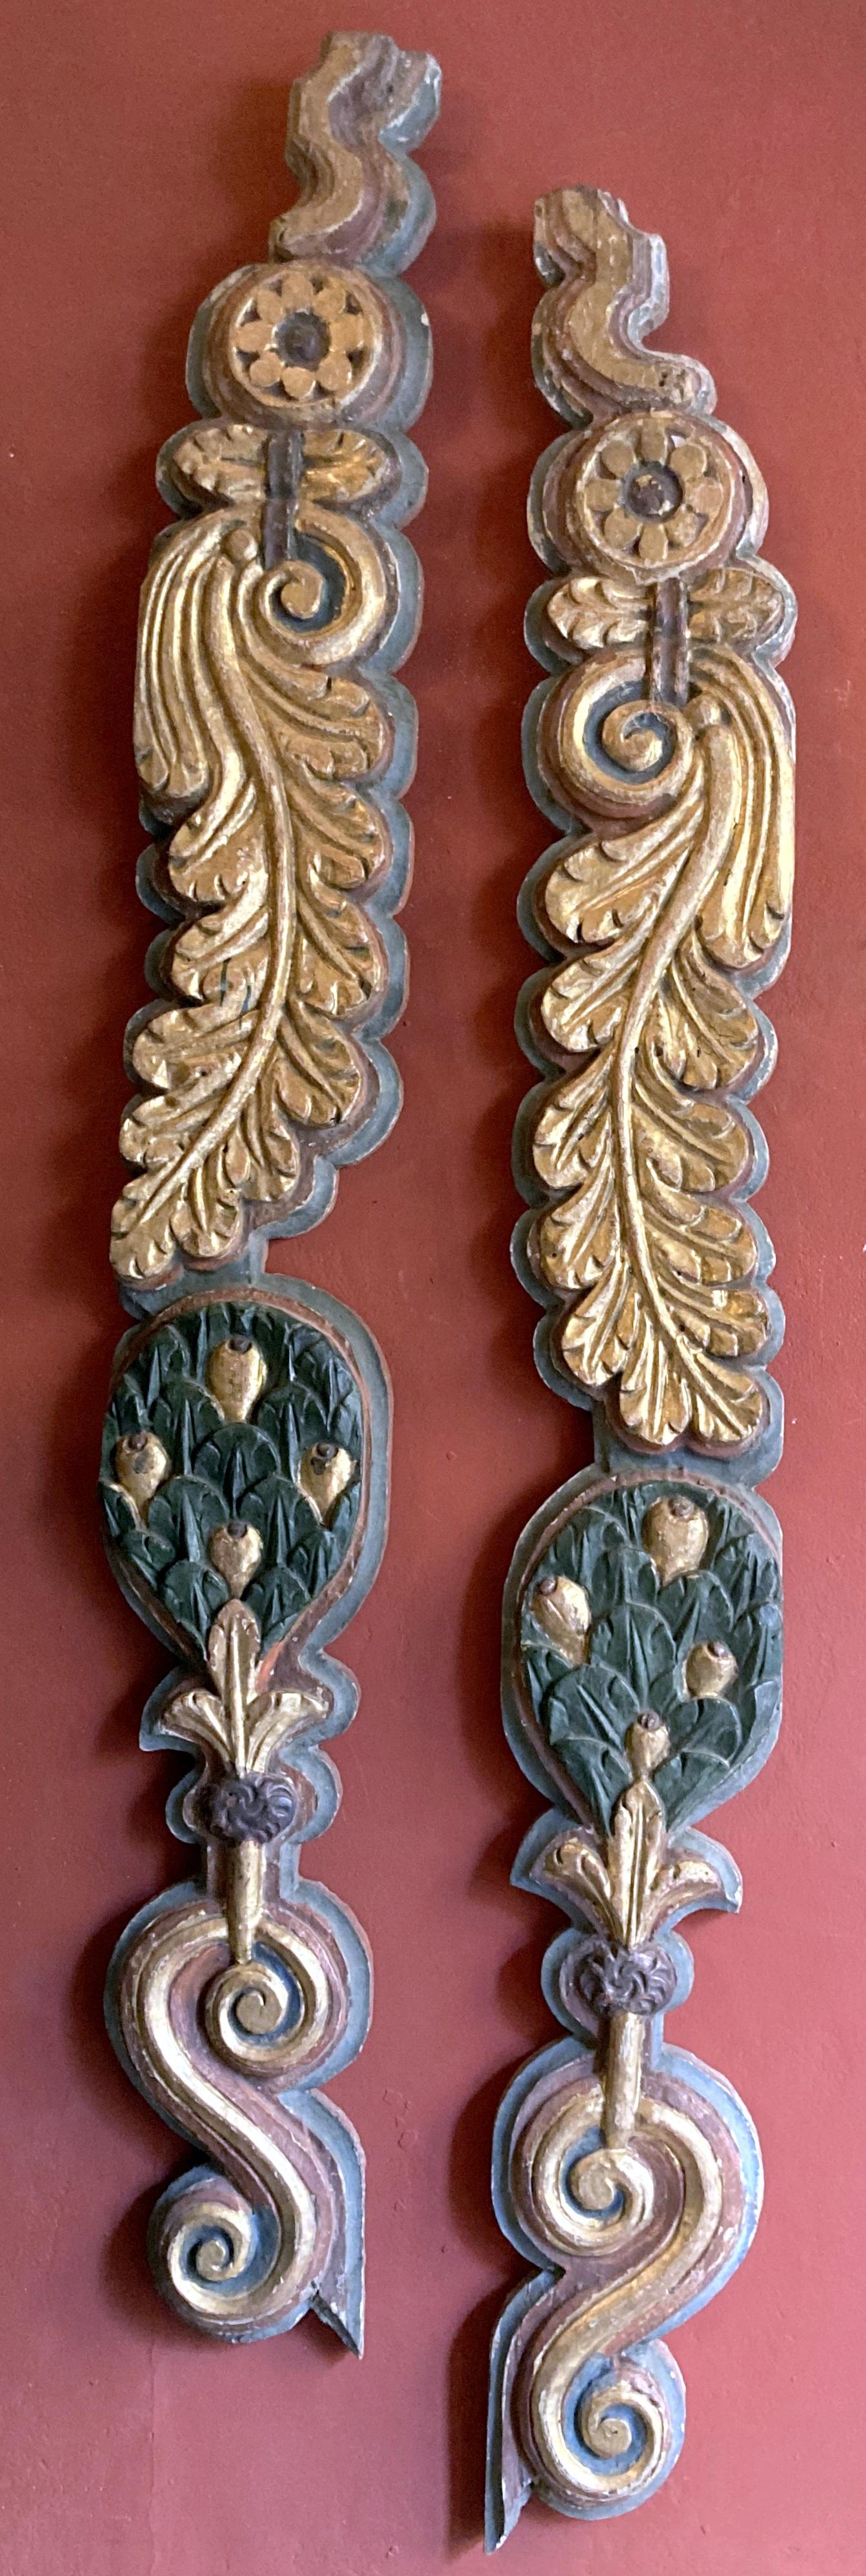 Wood Italian Antique 18th Century Handcarved Polychrome Painted Pilaster Friezes For Sale